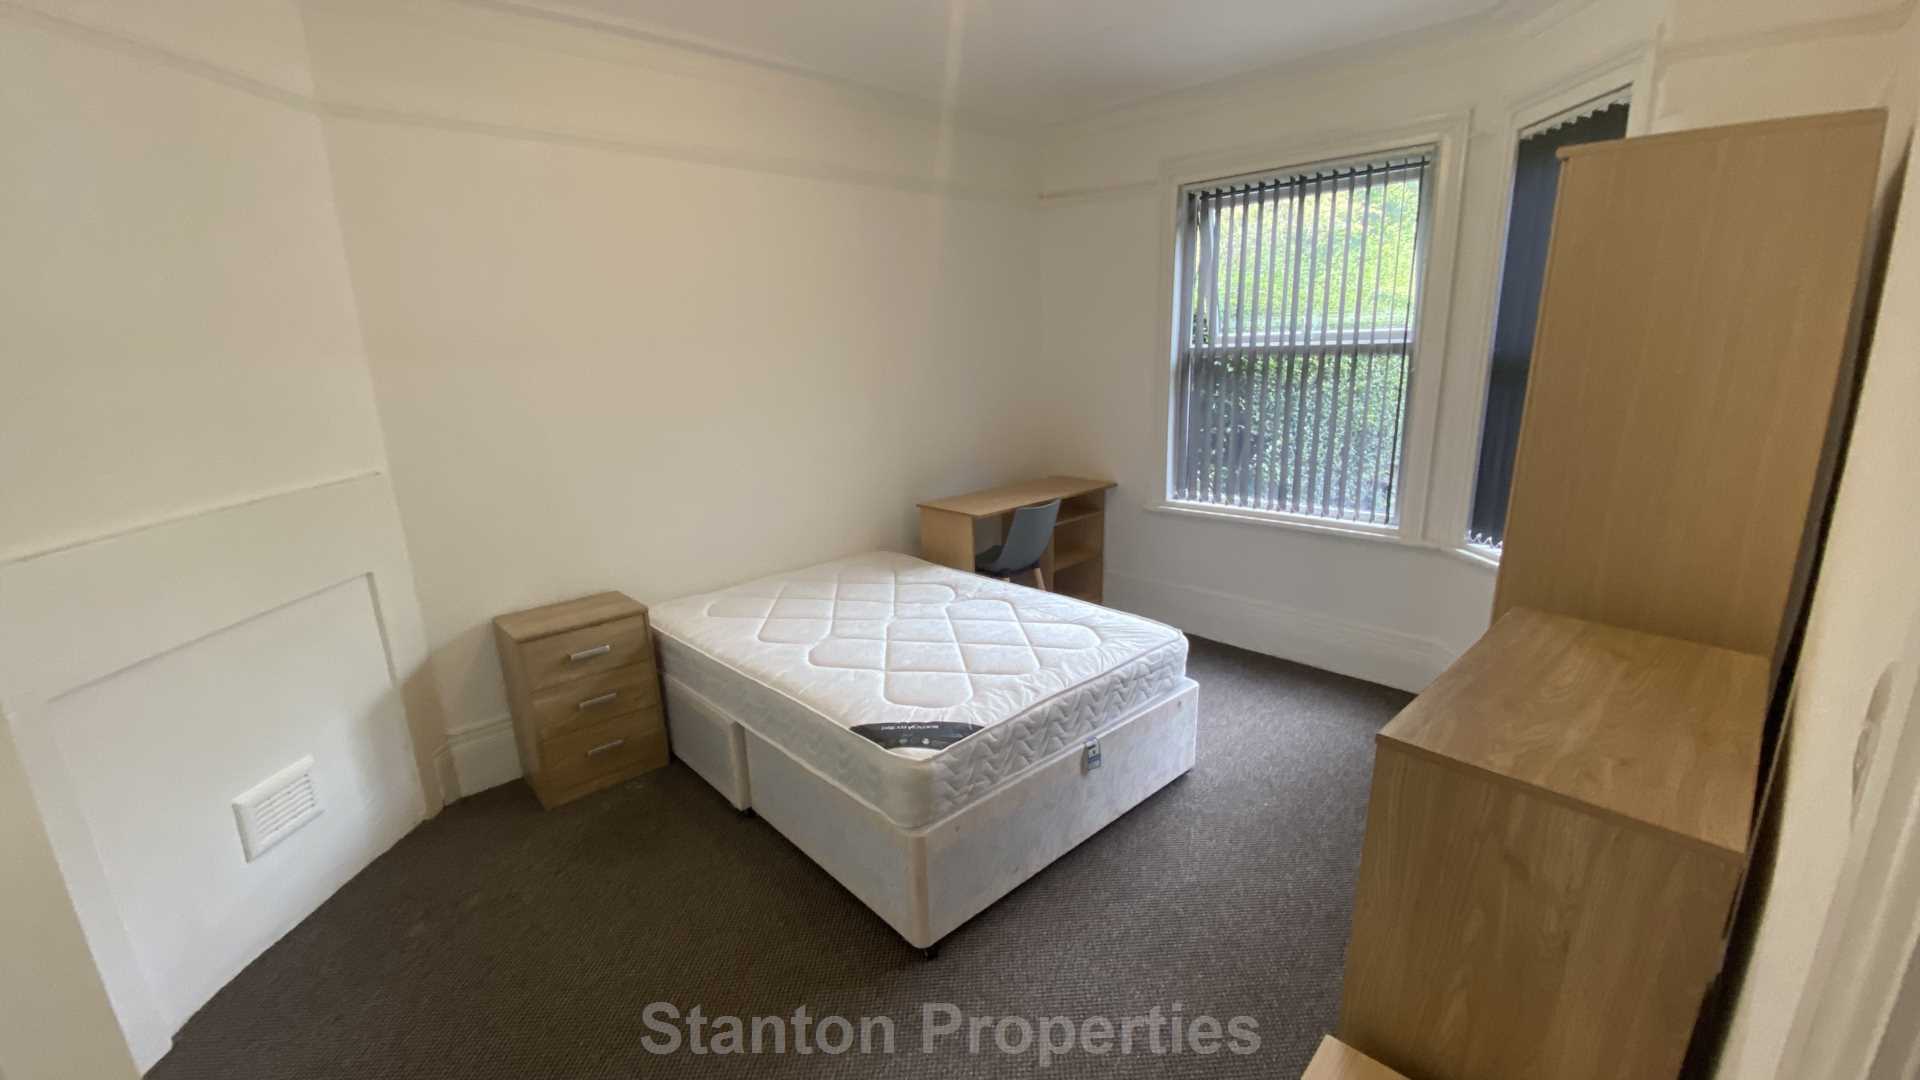 £130 pppw, Moseley Road, Fallowfield, M14 6NR, Image 11